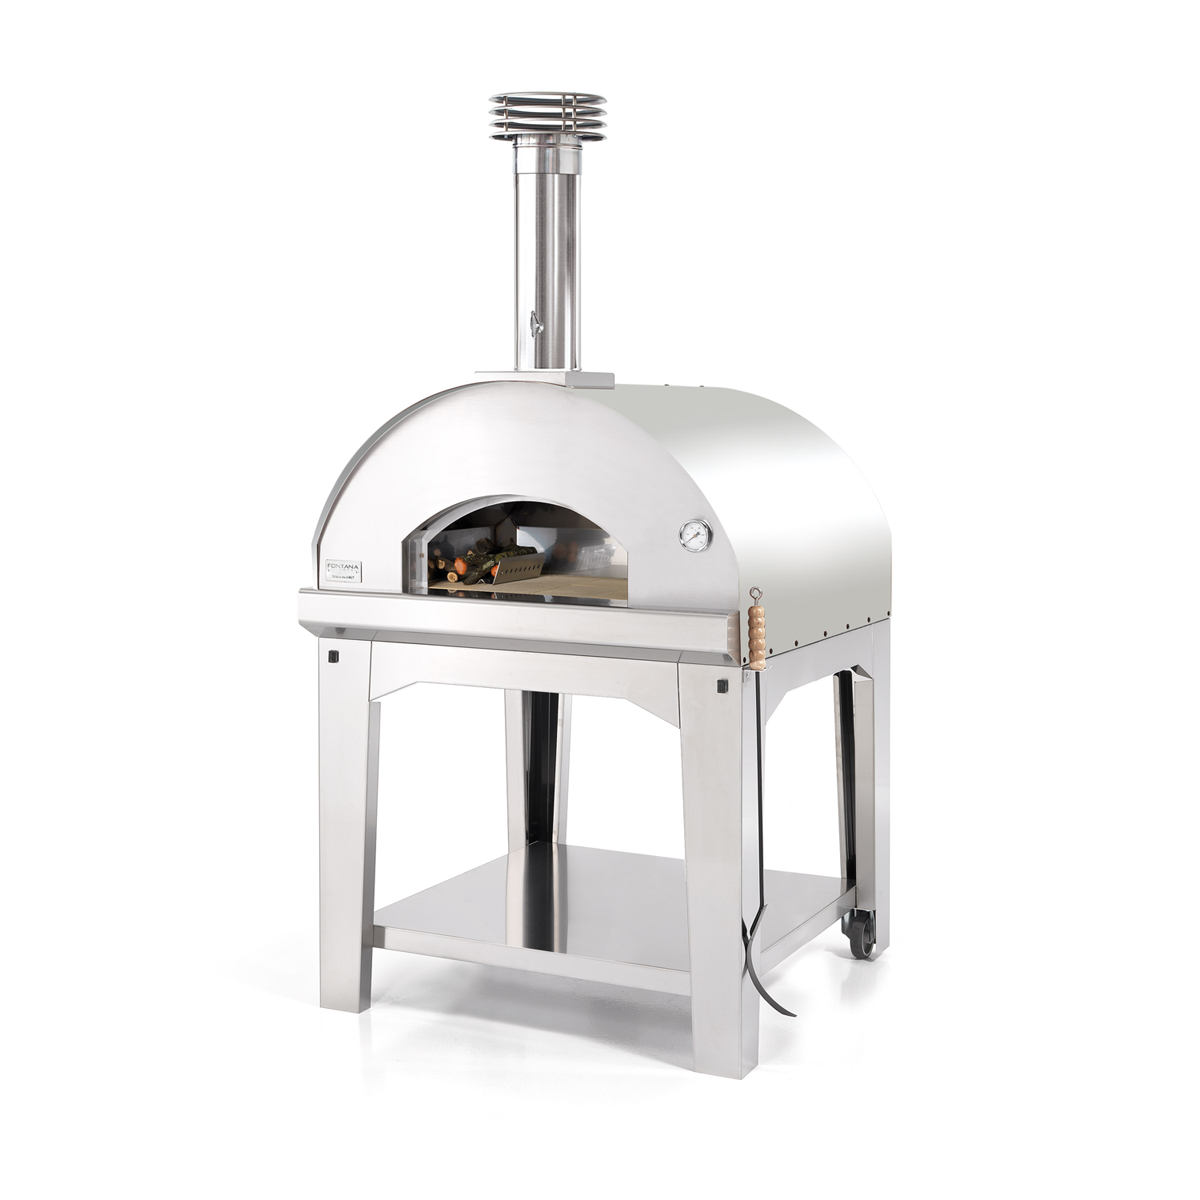 Fontana Forni Marinara Stainless Steel Wood Fired Pizza Oven Including Trolley